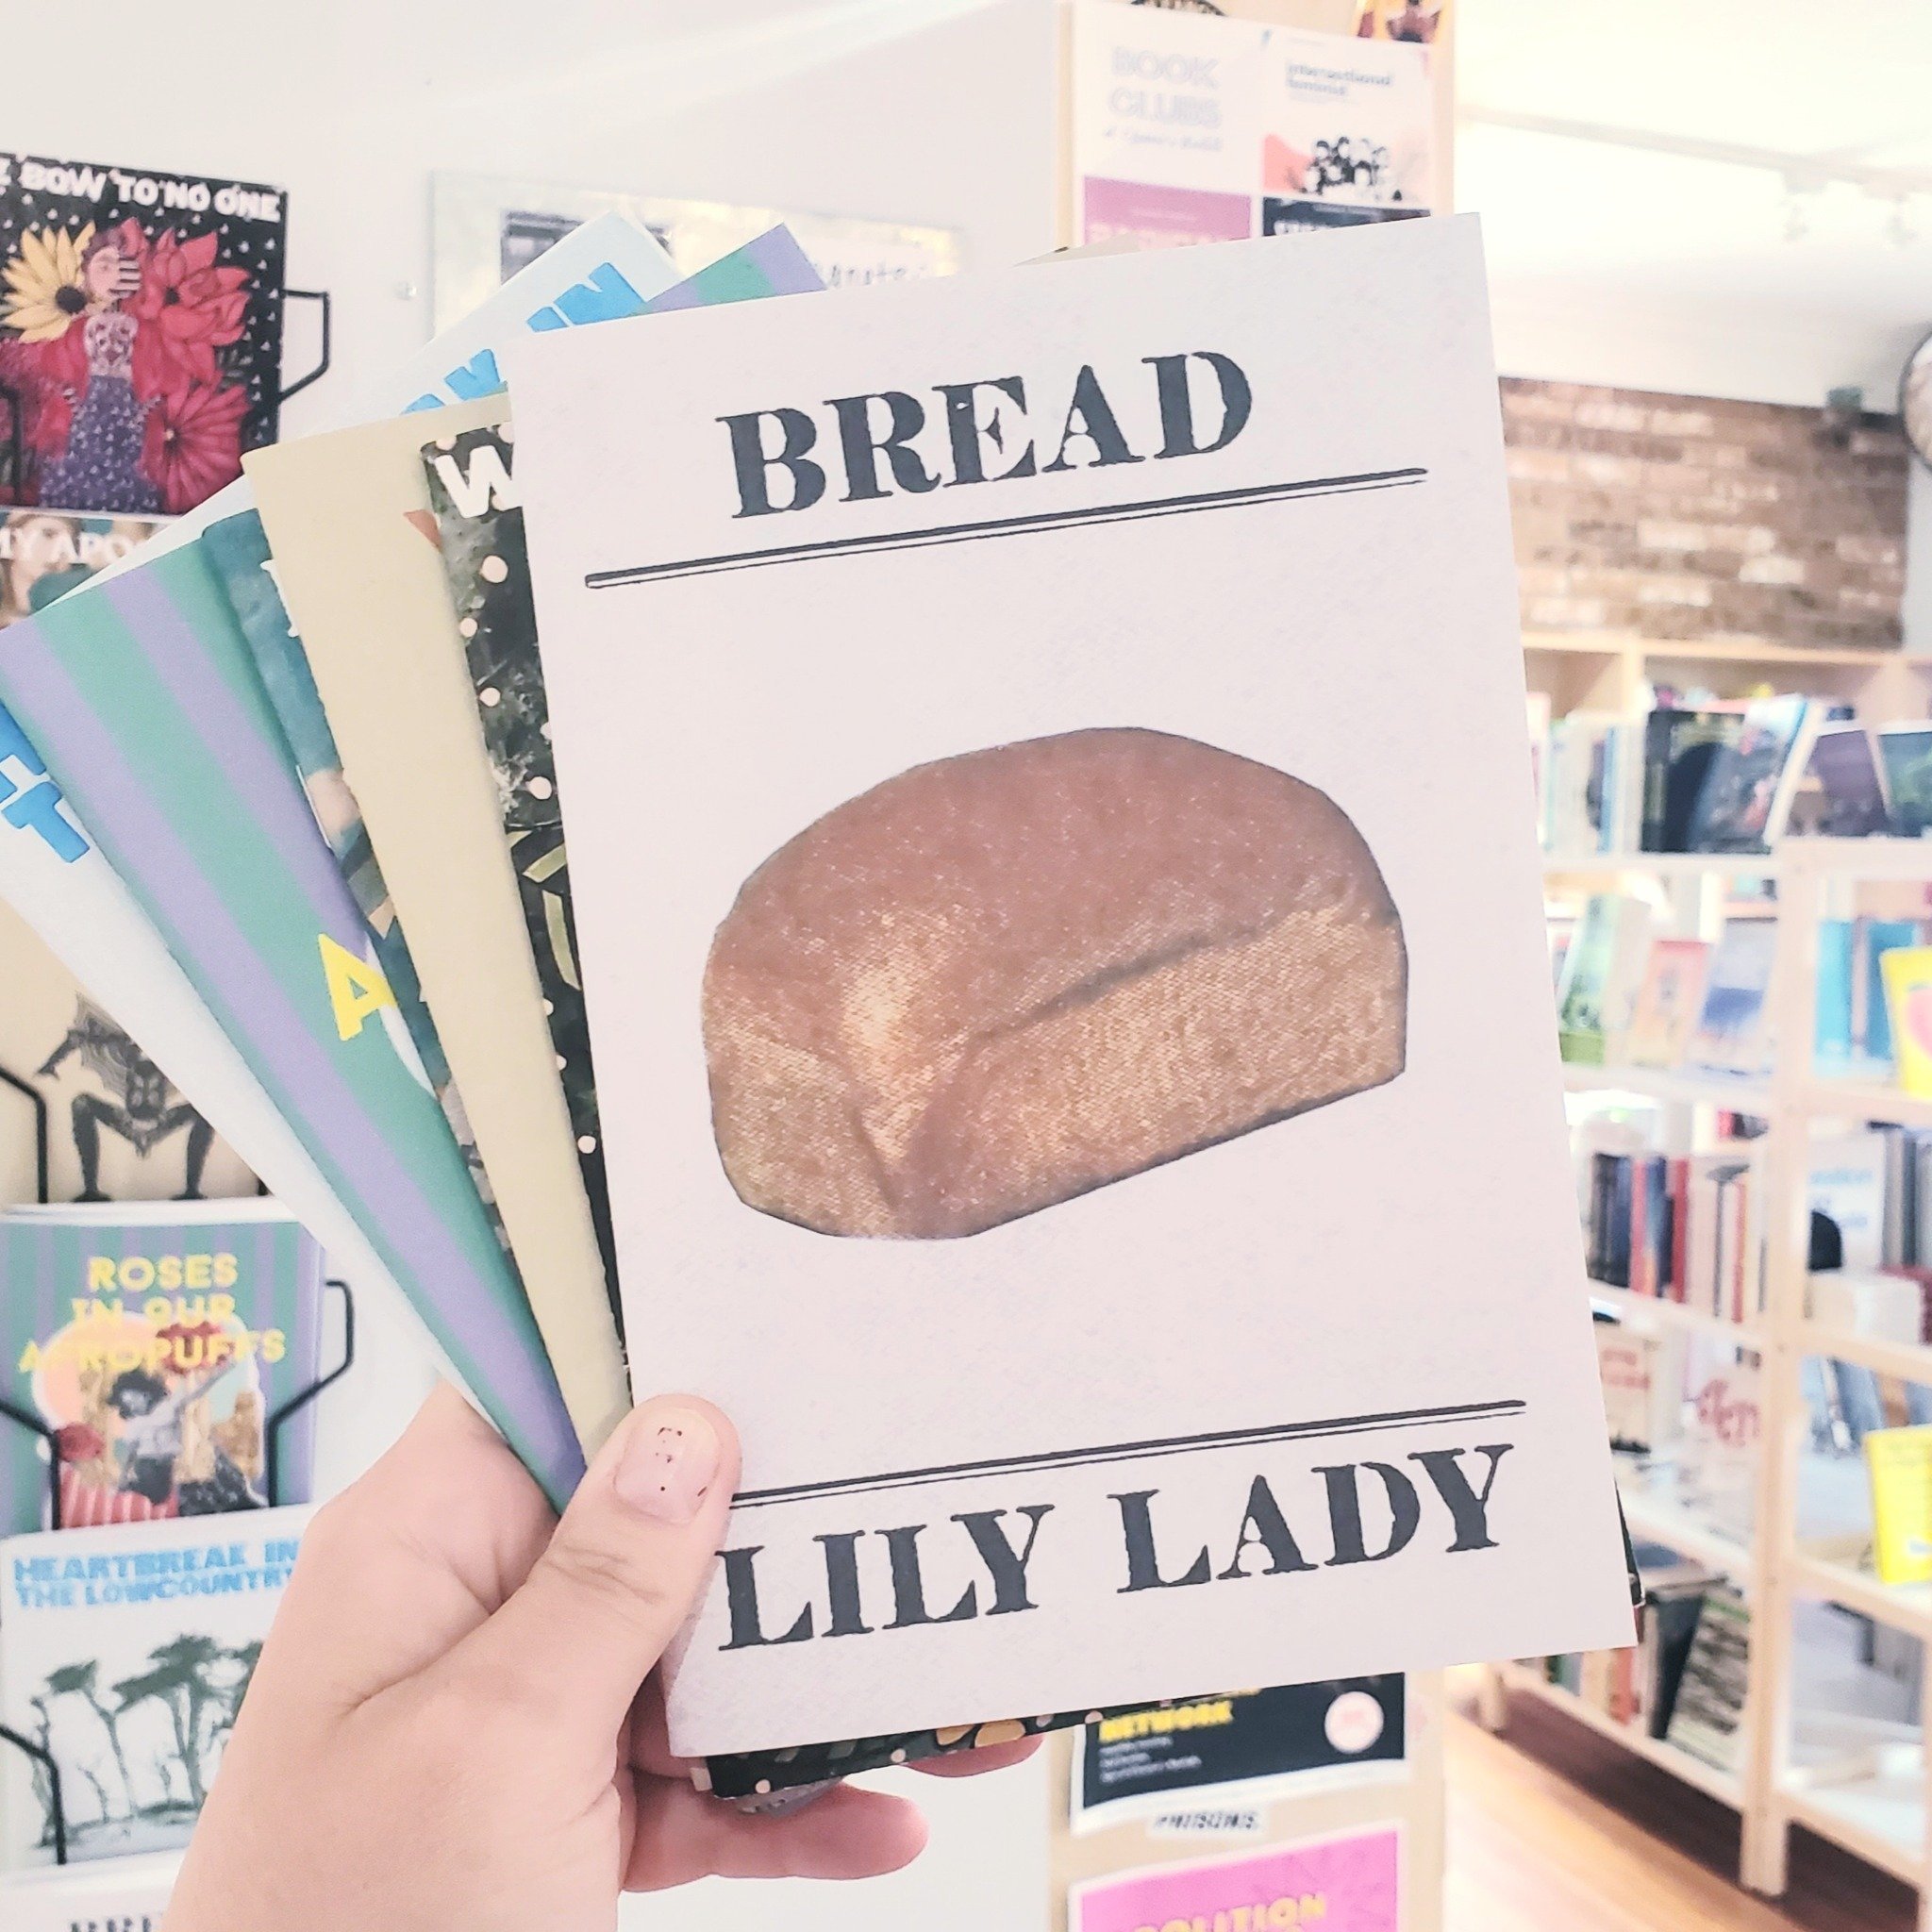 new zines in from @bottlecappress 

&quot;in BREAD, Lady catalogs their own personal history in the pursuit of bread. holding jobs as a nanny, sex worker, high-end restaurant server, and more, this collection of poems illustrates the alienation of la